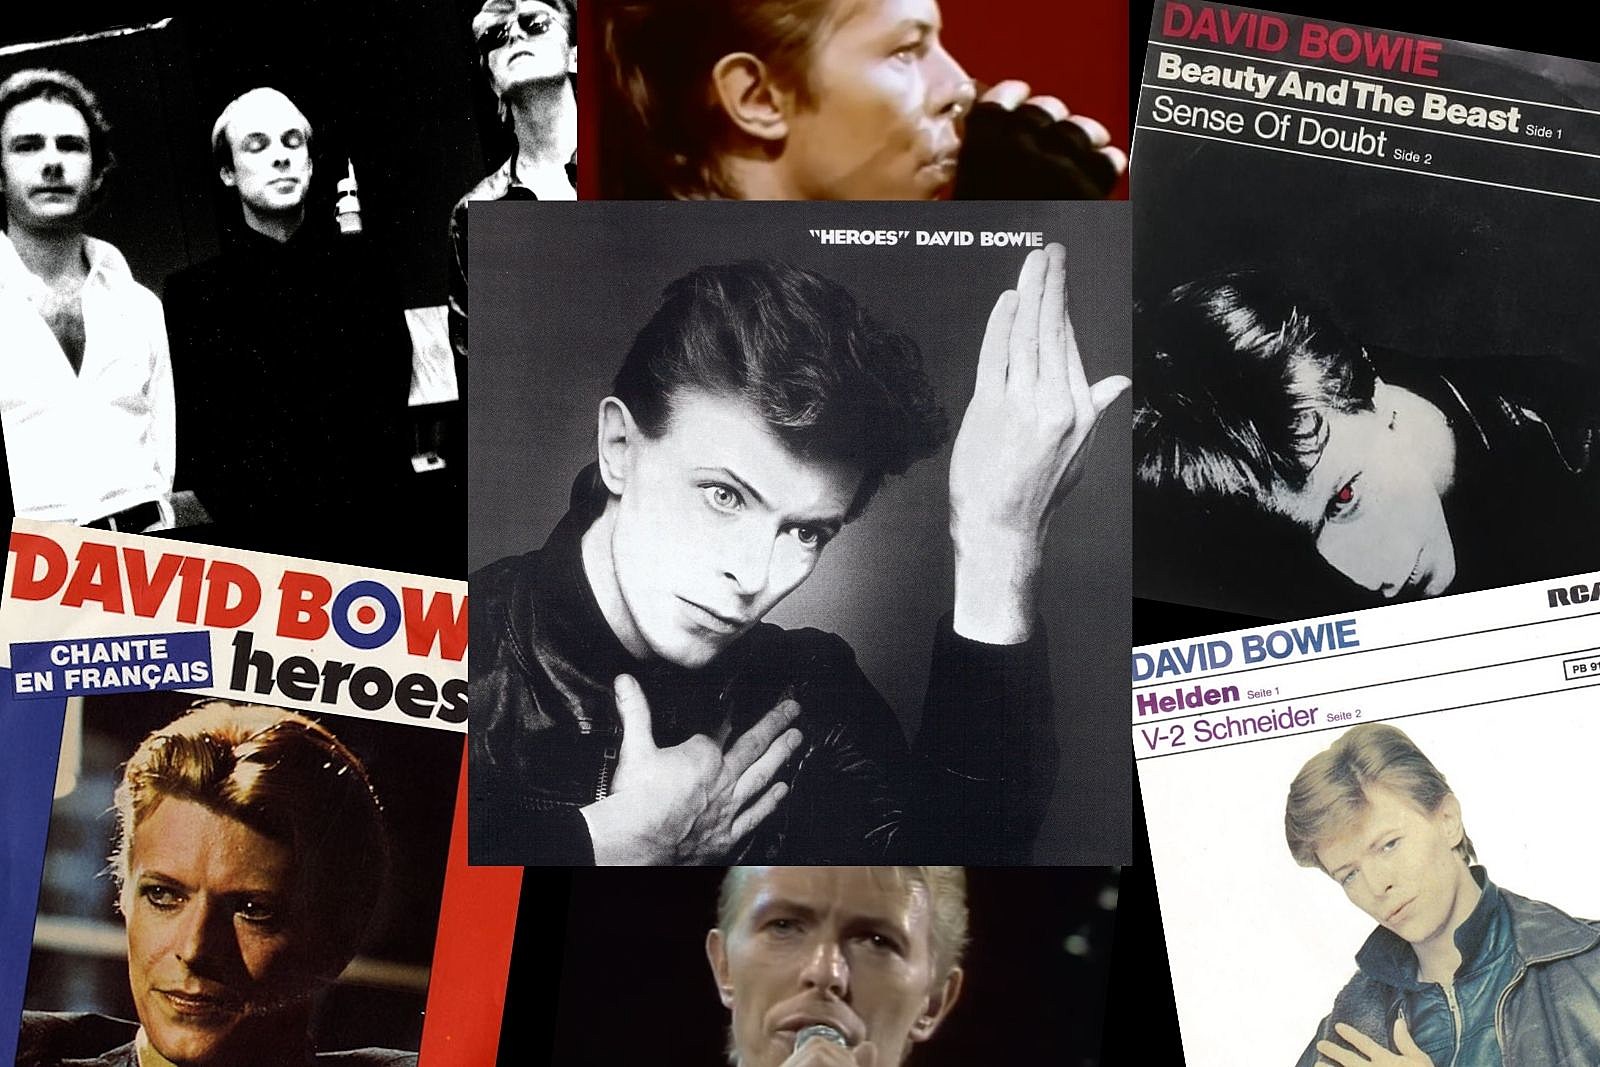 David Bowie's 'Heroes' — the ultimate epitaph — FT.com